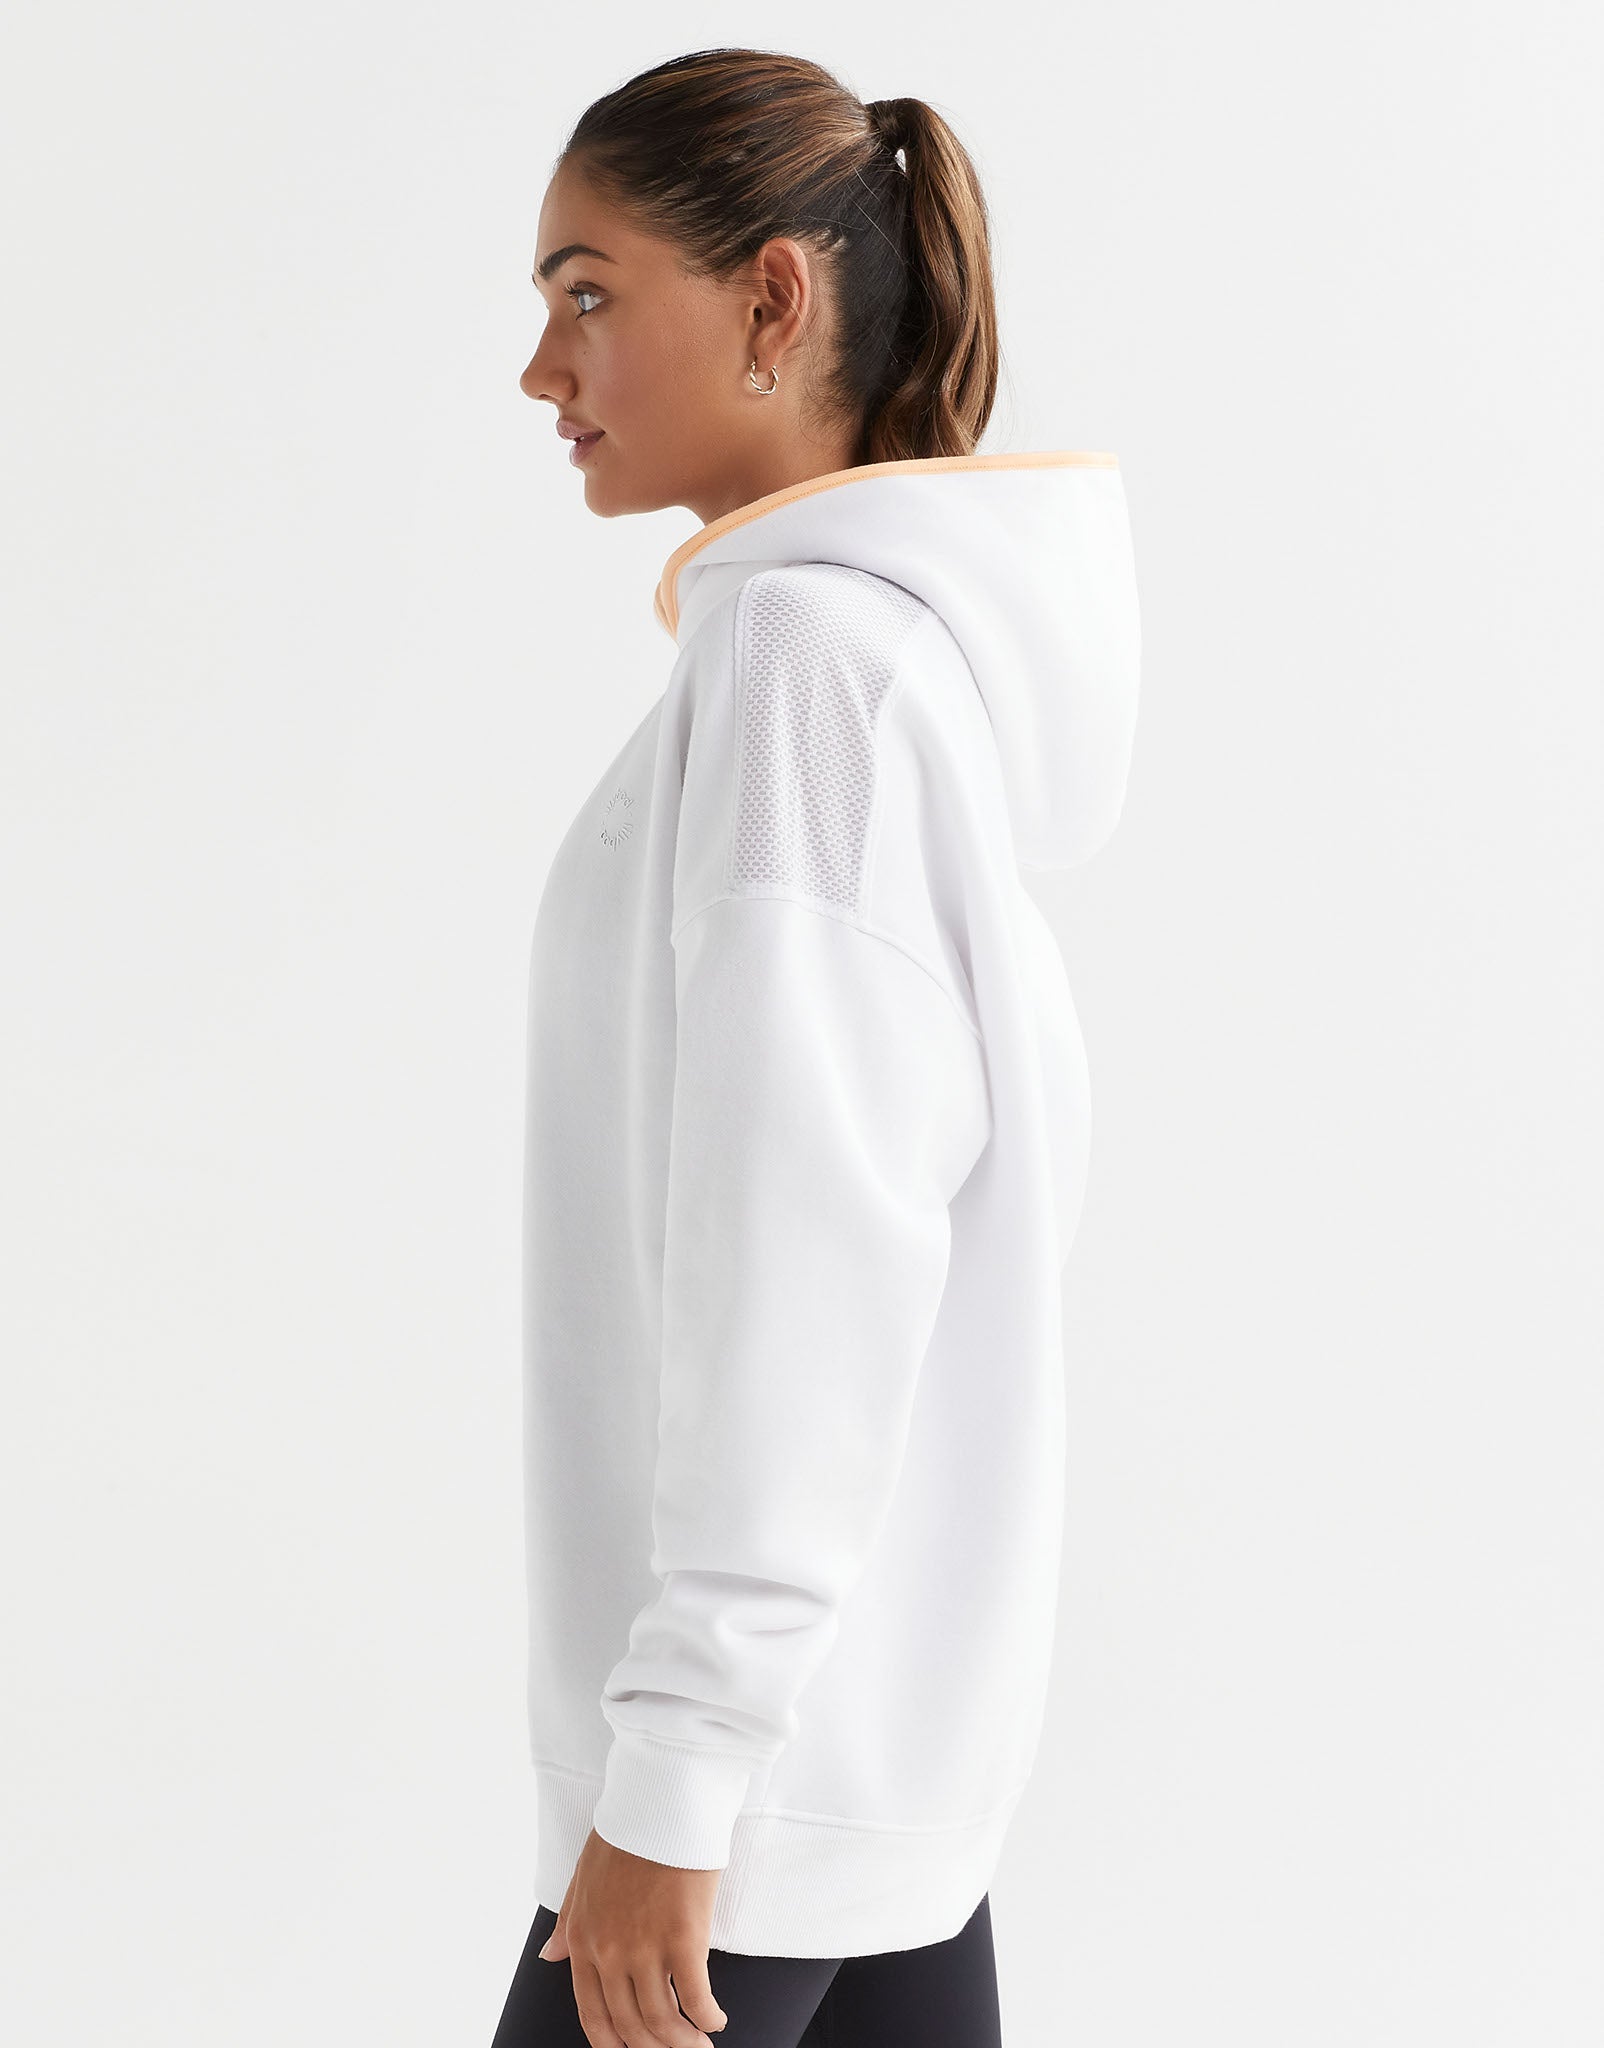 Lilybod-Lucy-Hooded-Sweat-White-LT68-C22-WT-4.jpeg